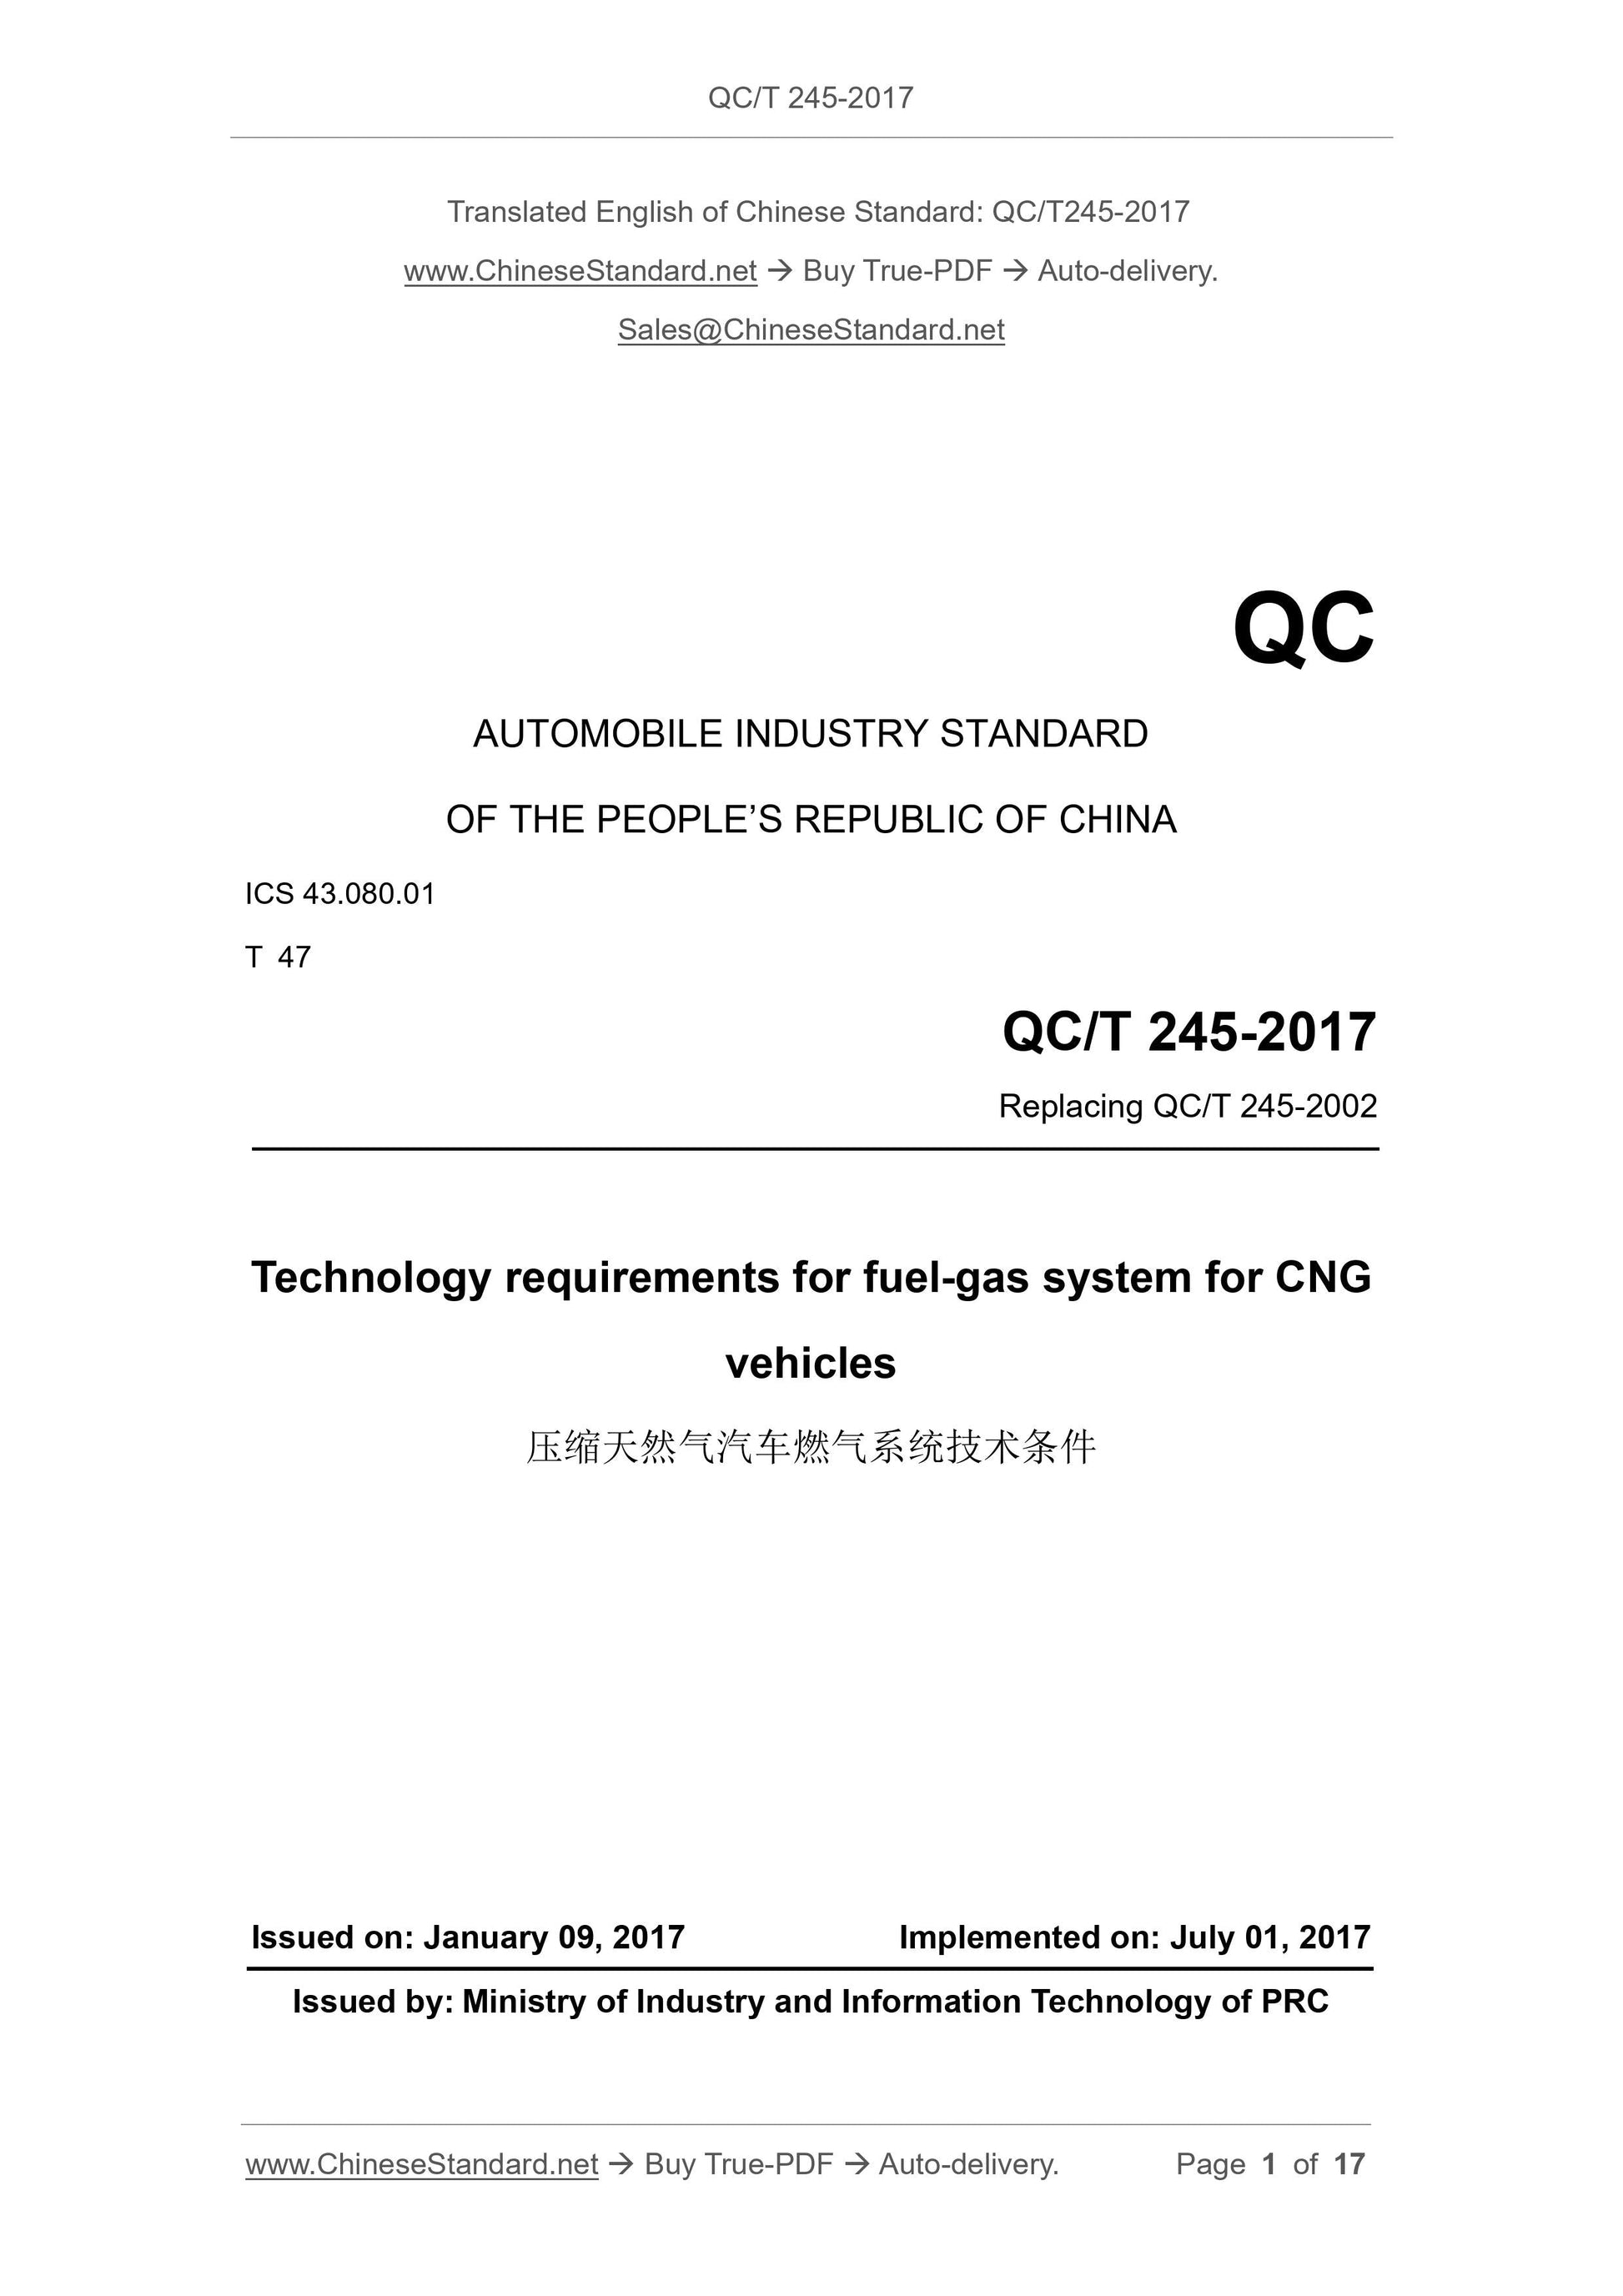 QC/T 245-2017 Page 1